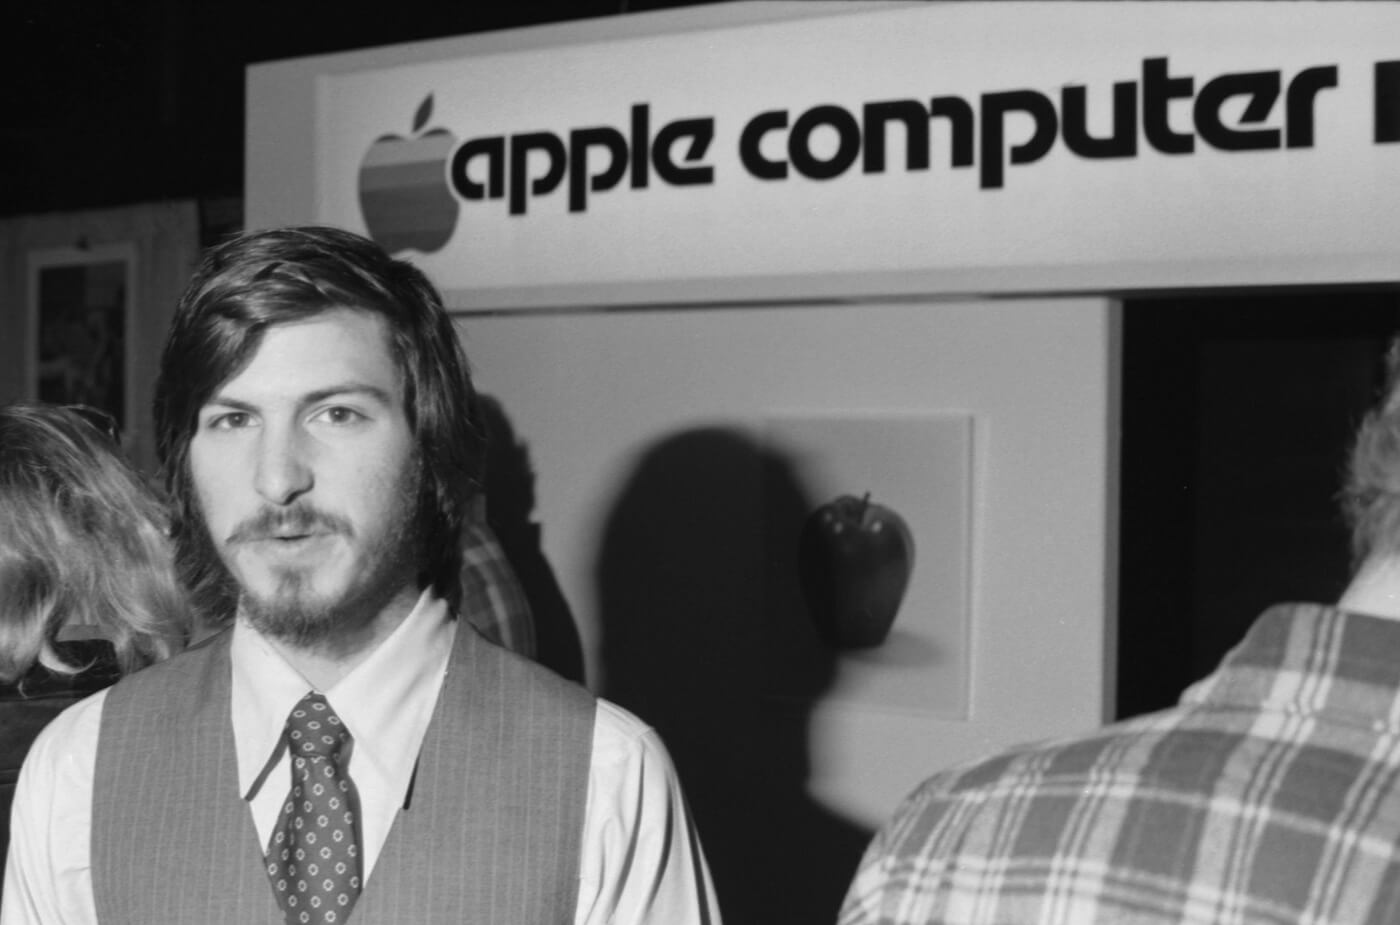 Apple co-founder Steve Jobs would have turned 65 today